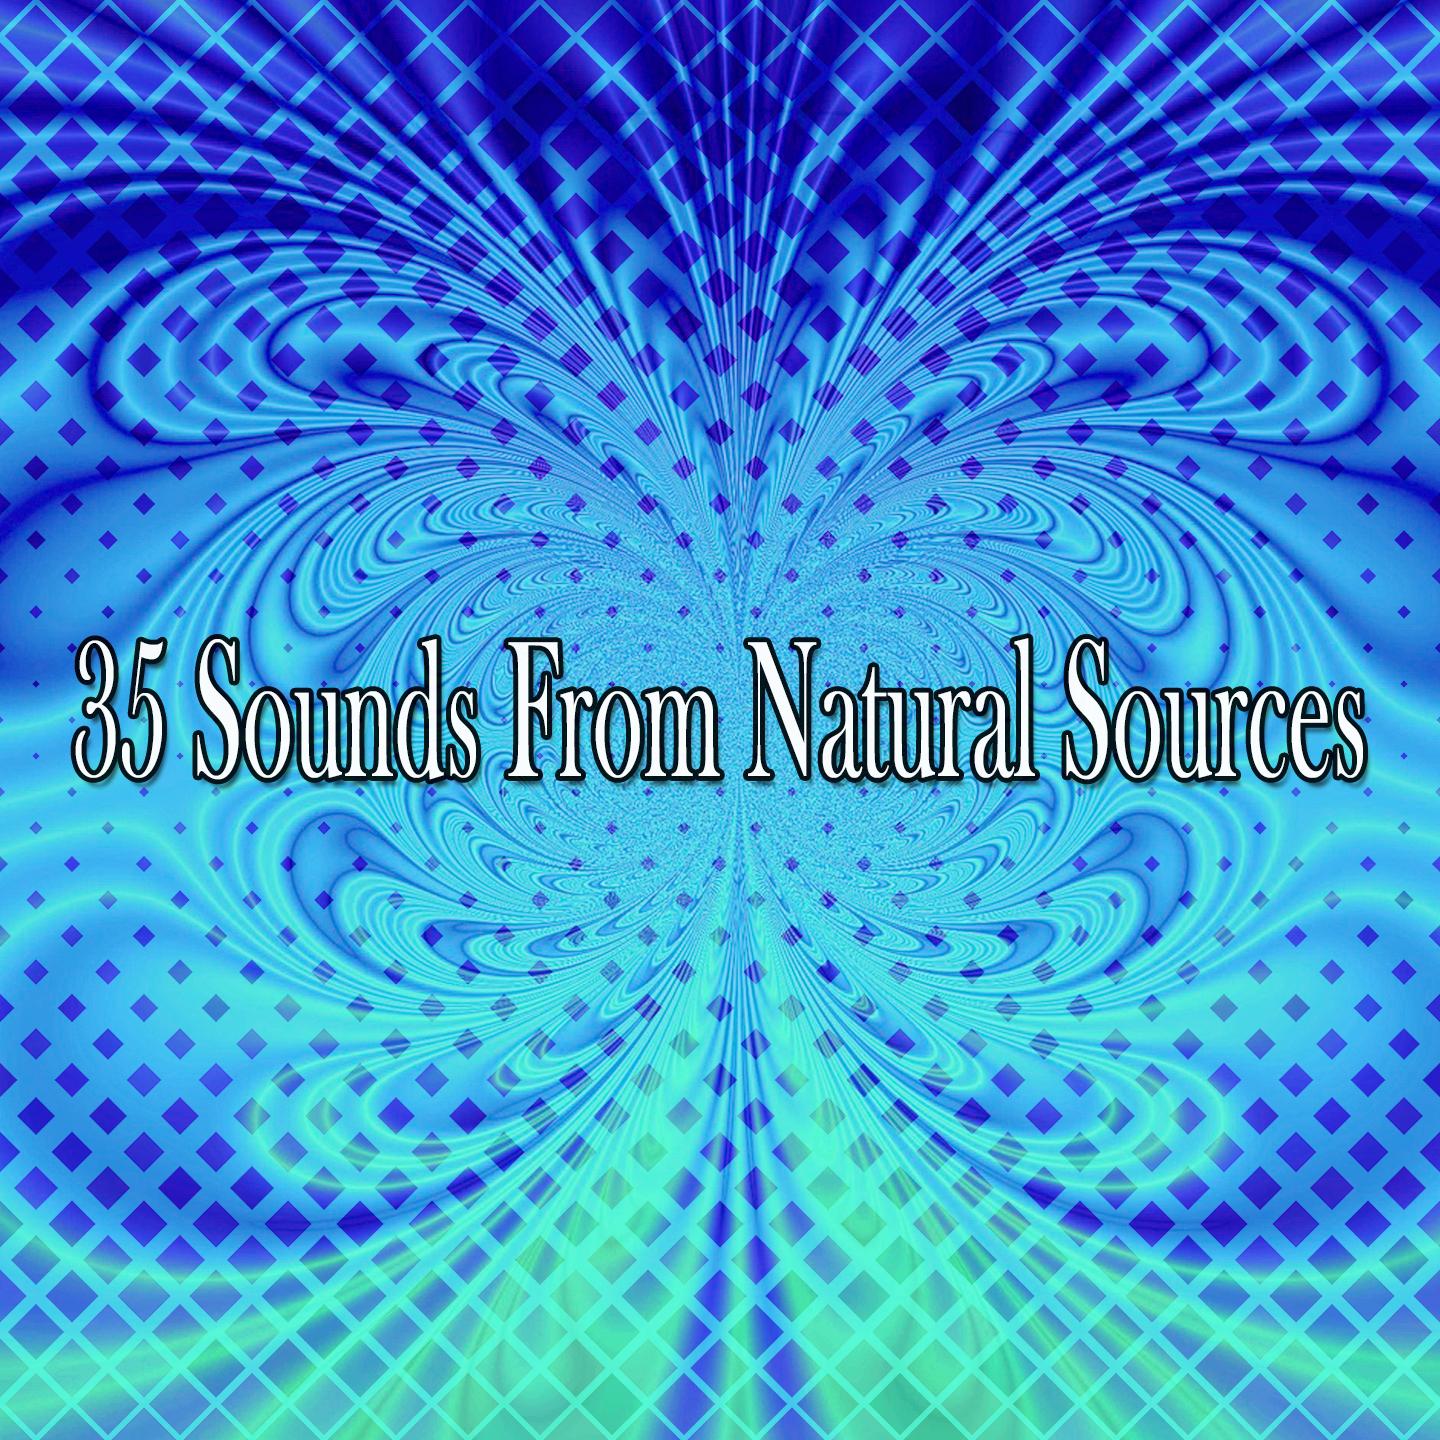 35 Sounds From Natural Sources